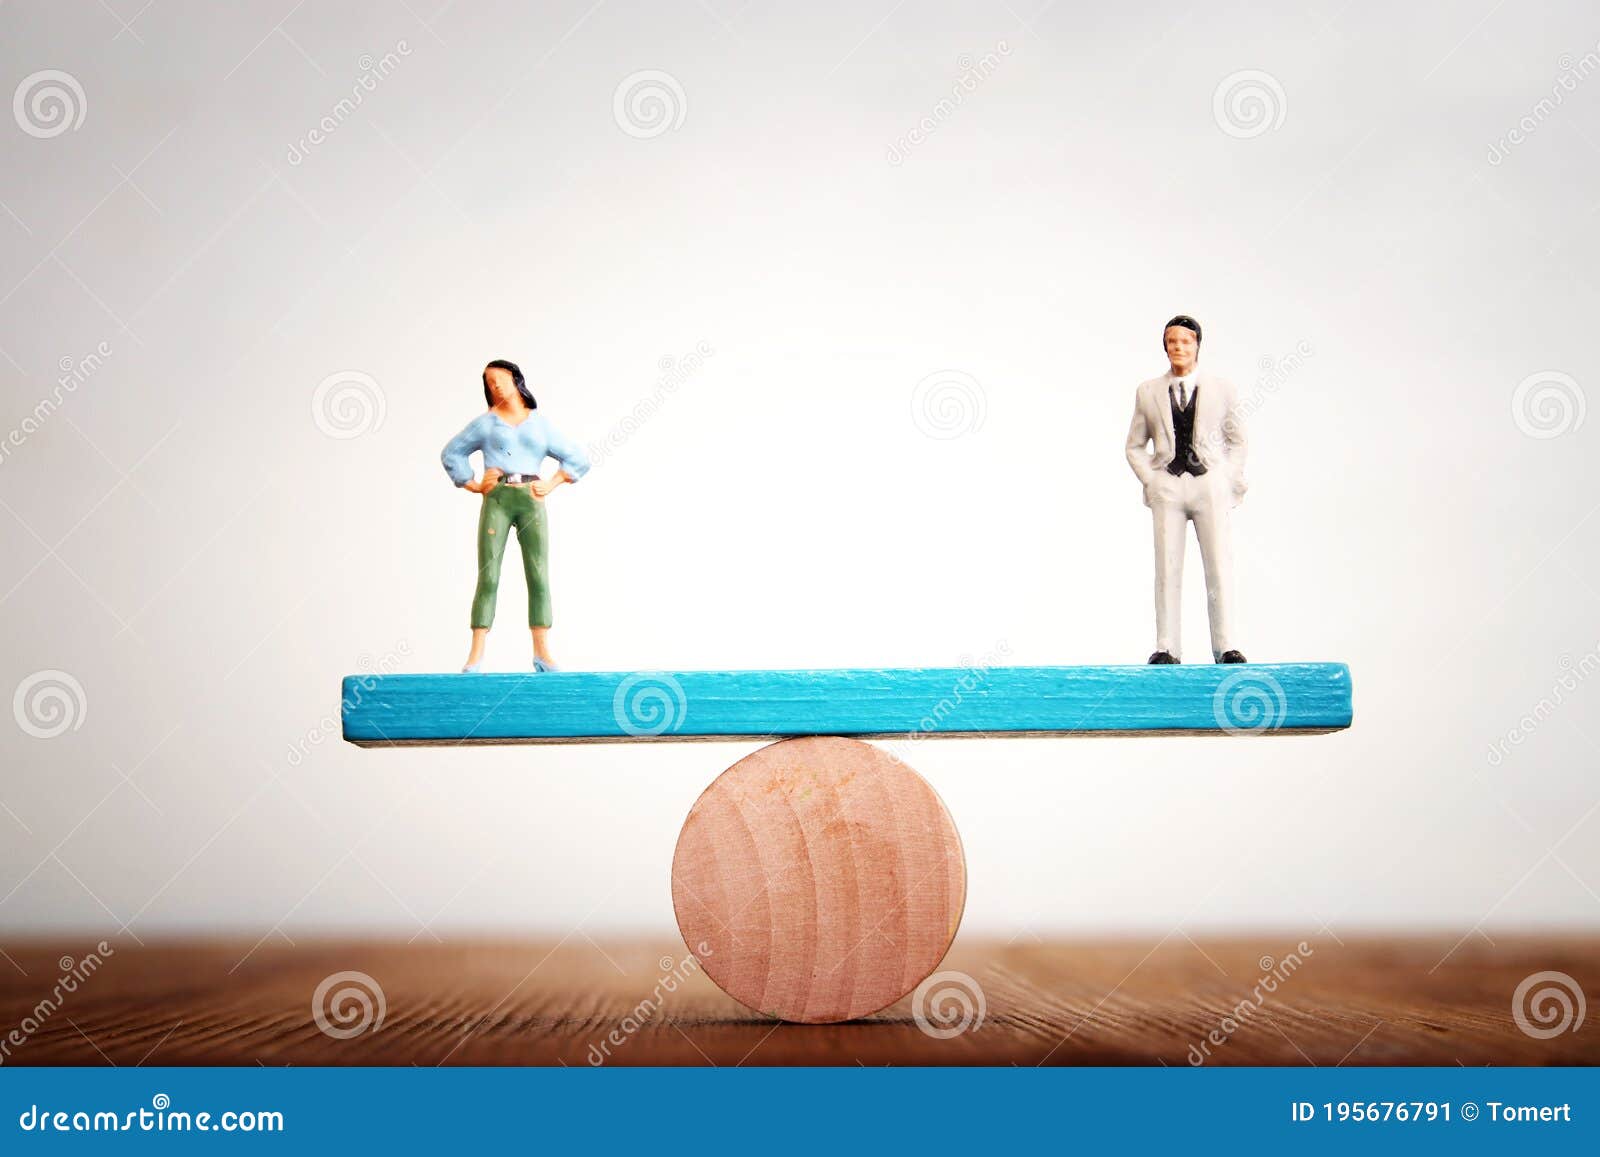 concept image of gender equality. man and woman balancing on seesaw